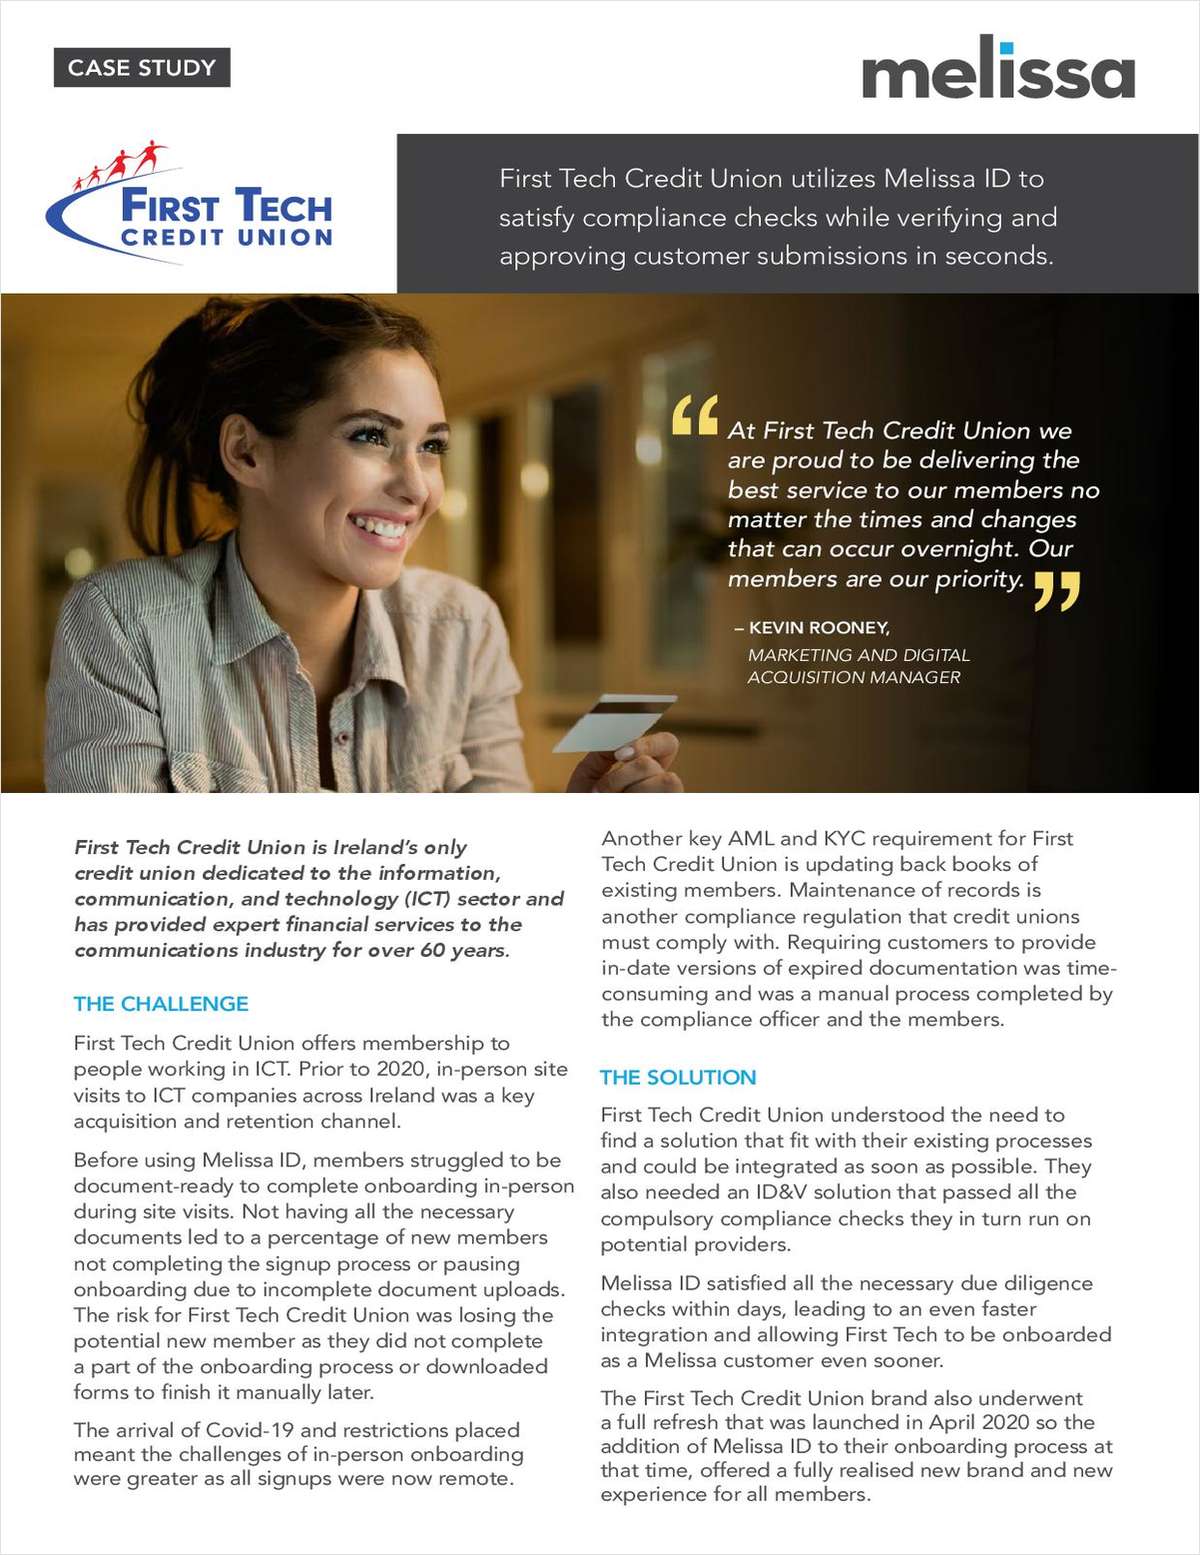 Case Study: First Tech Credit Union Satisfies Compliance Checks While Verifying and Approving Customer Submissions in Seconds